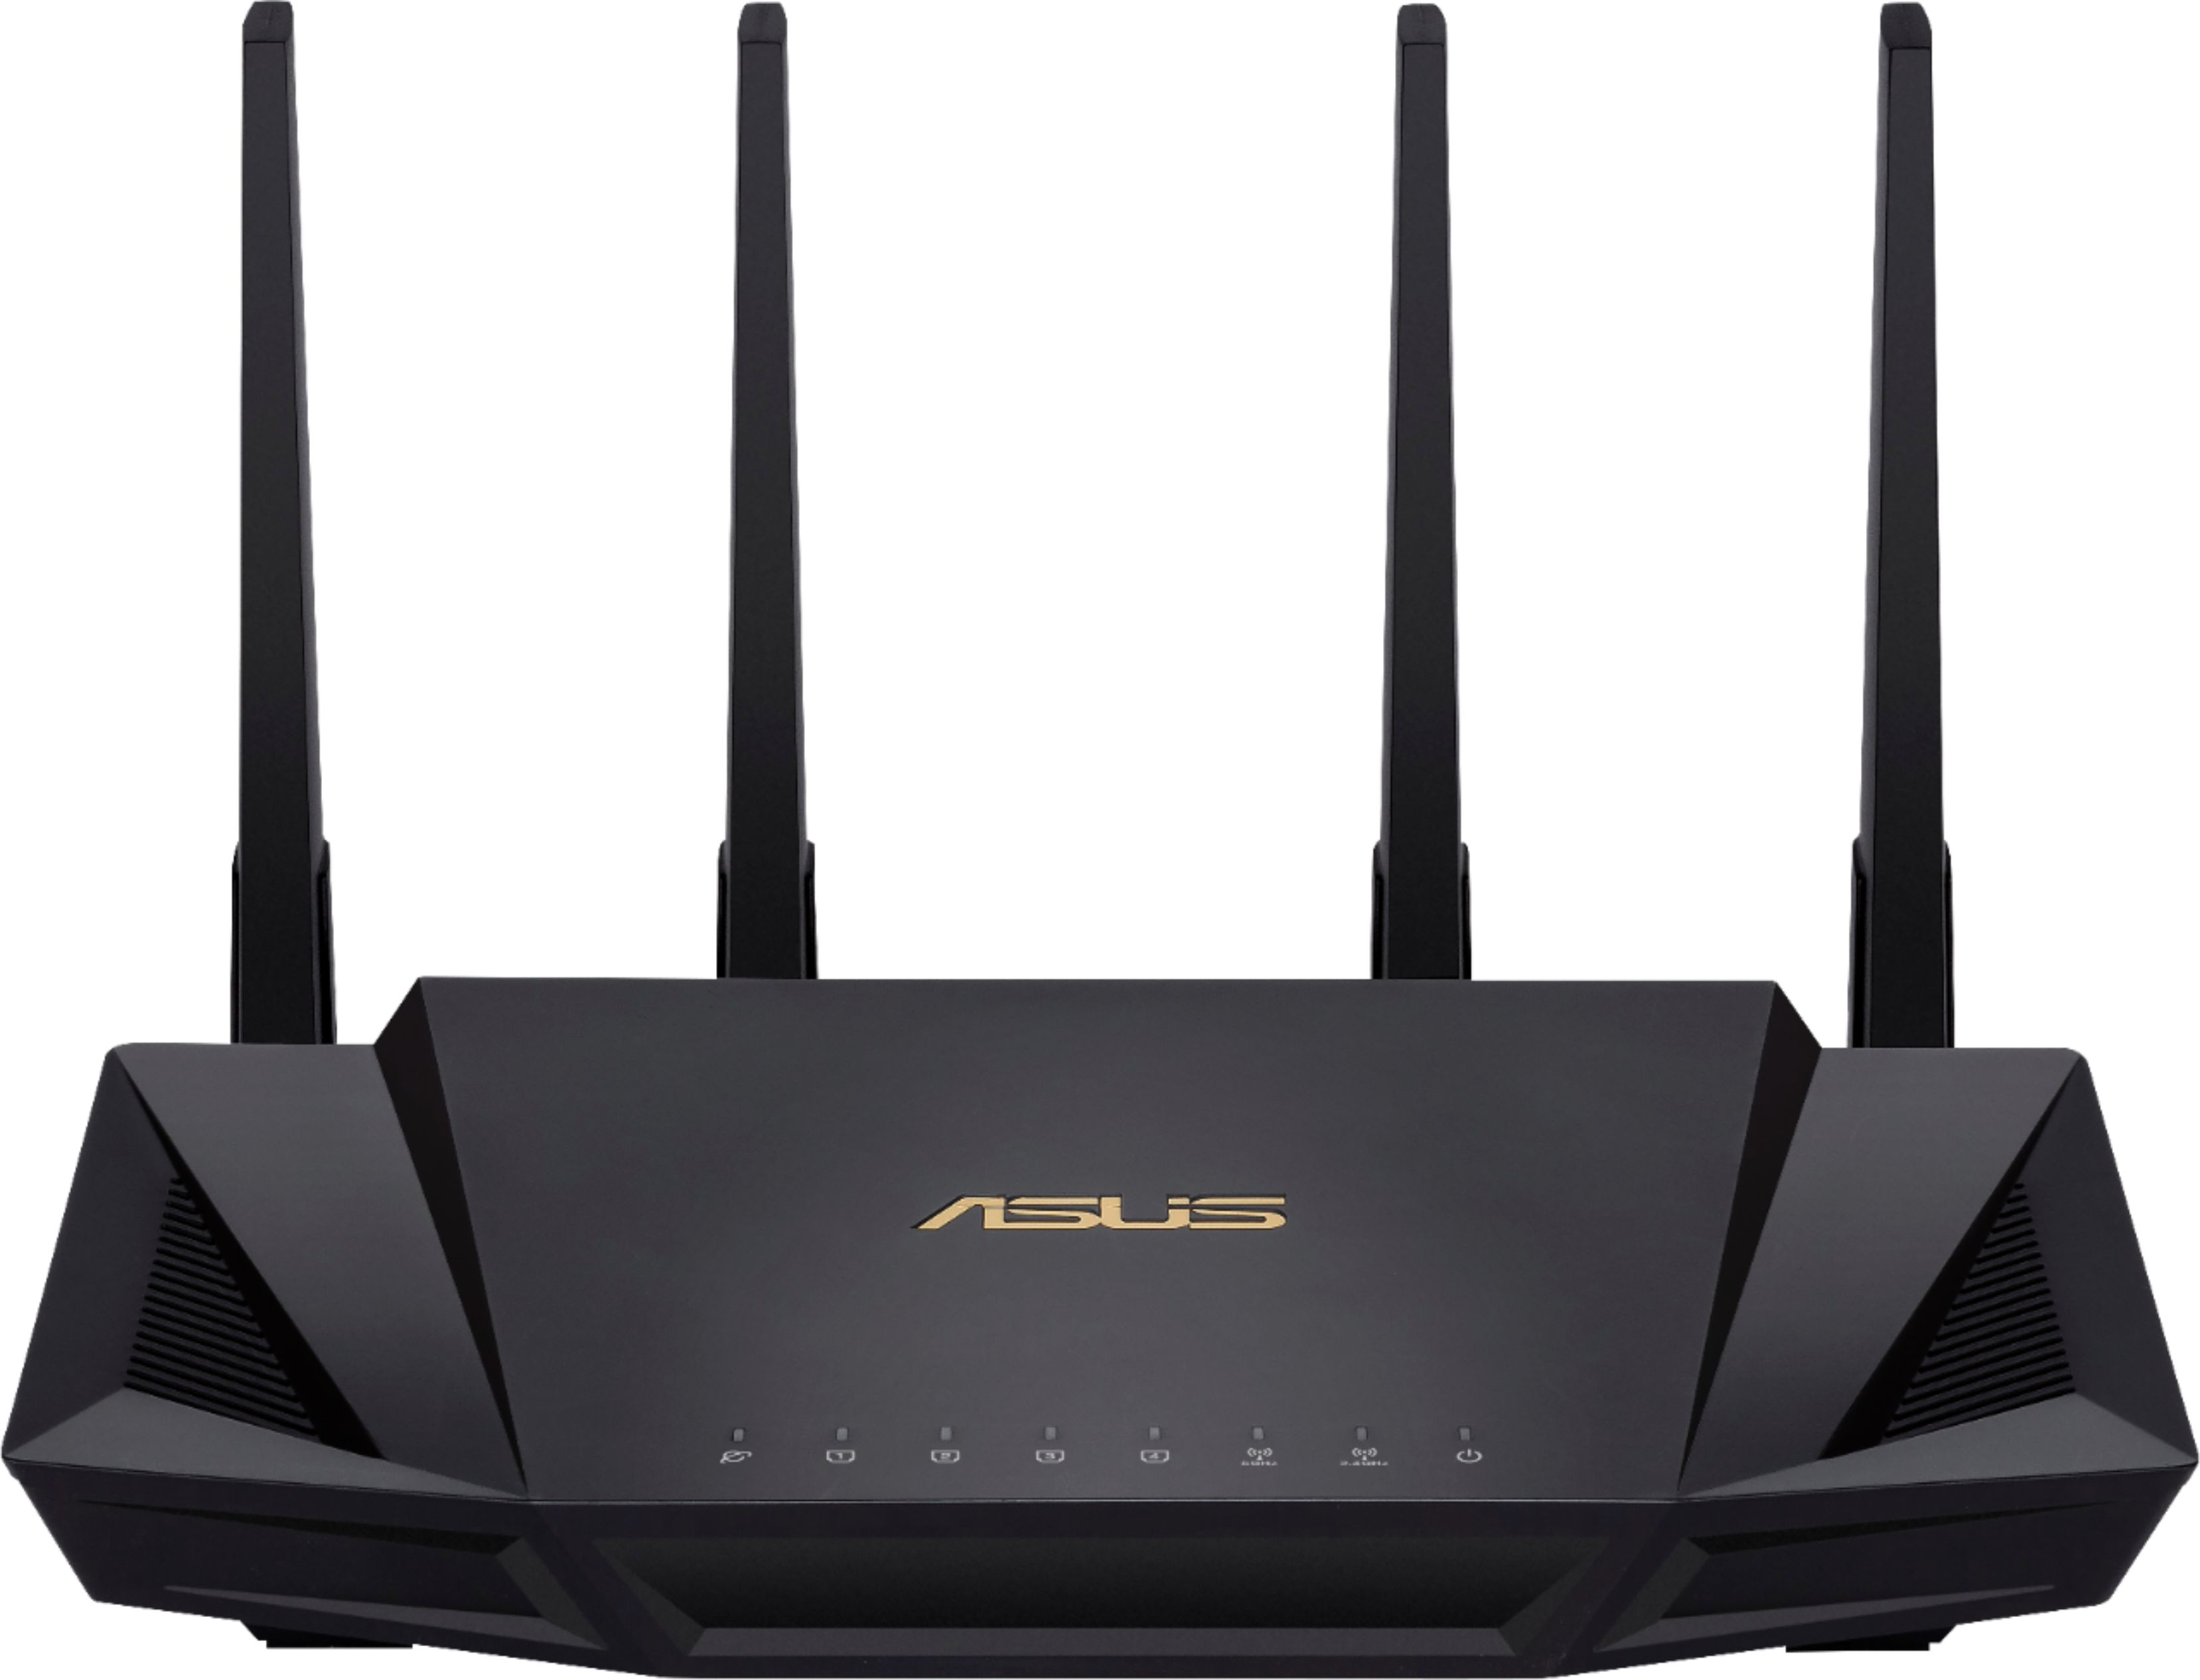 ASUS Dual-Band WiFi 6 Router with time internet Security Black RT-AX58U - Best Buy